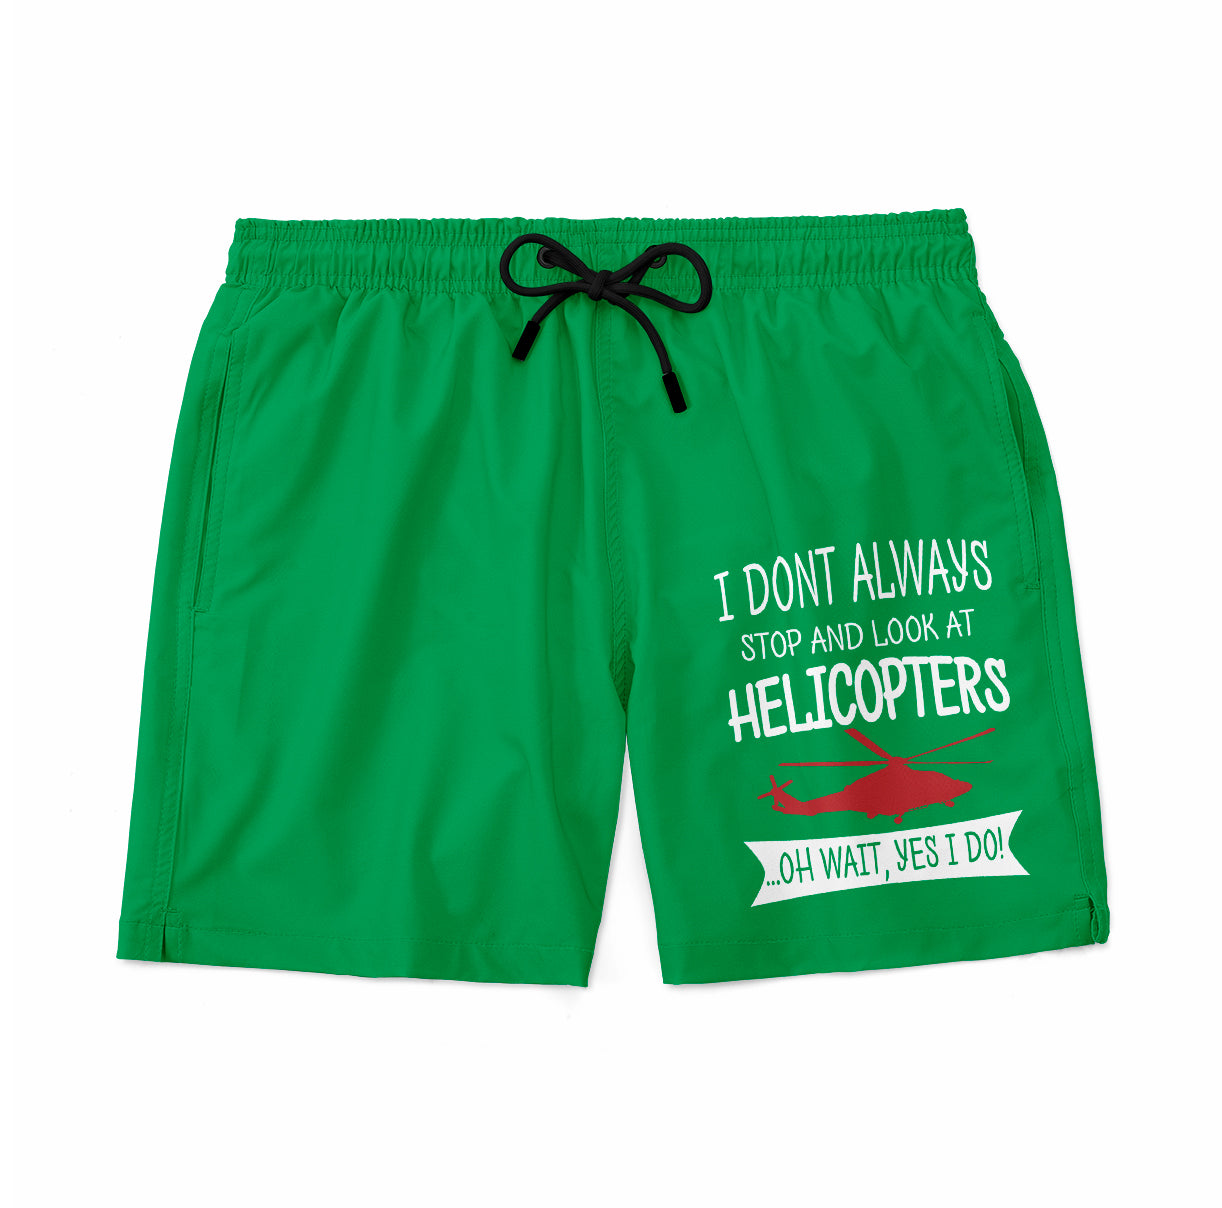 I Don't Always Stop and Look at Helicopters Designed Swim Trunks & Shorts